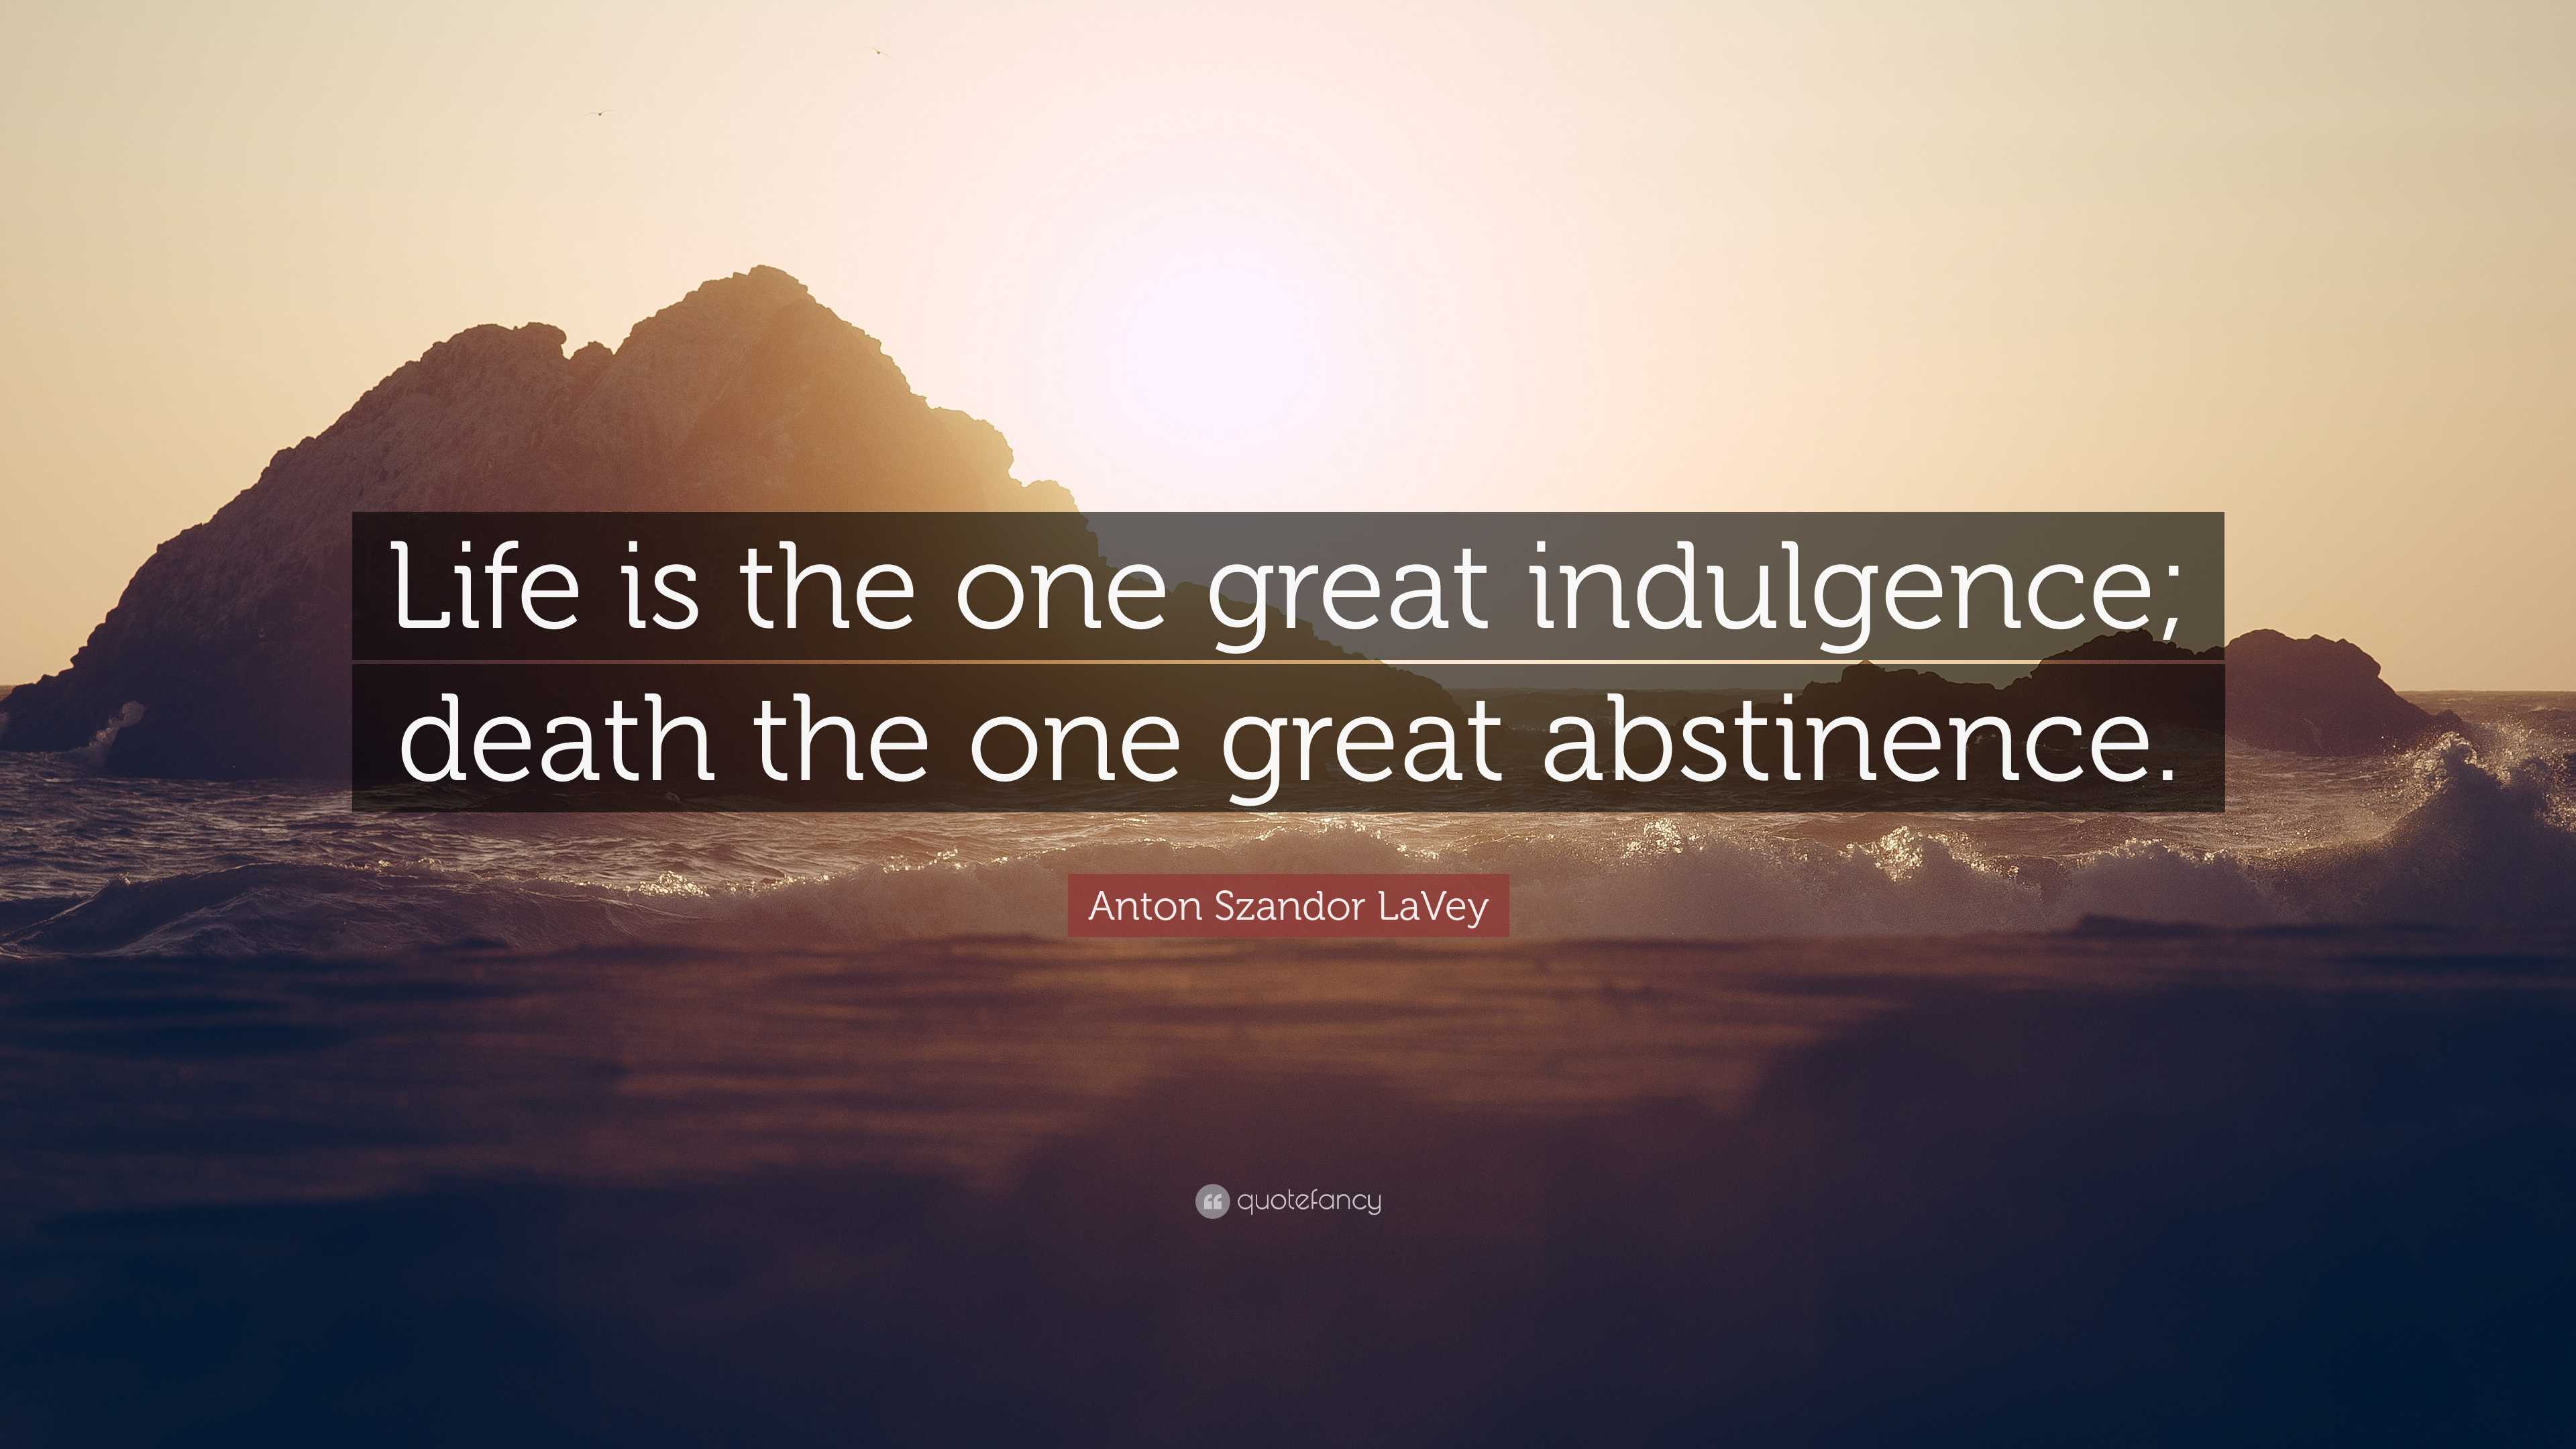 Anton Szandor LaVey Quote: “Life is the one great indulgence; death the ...